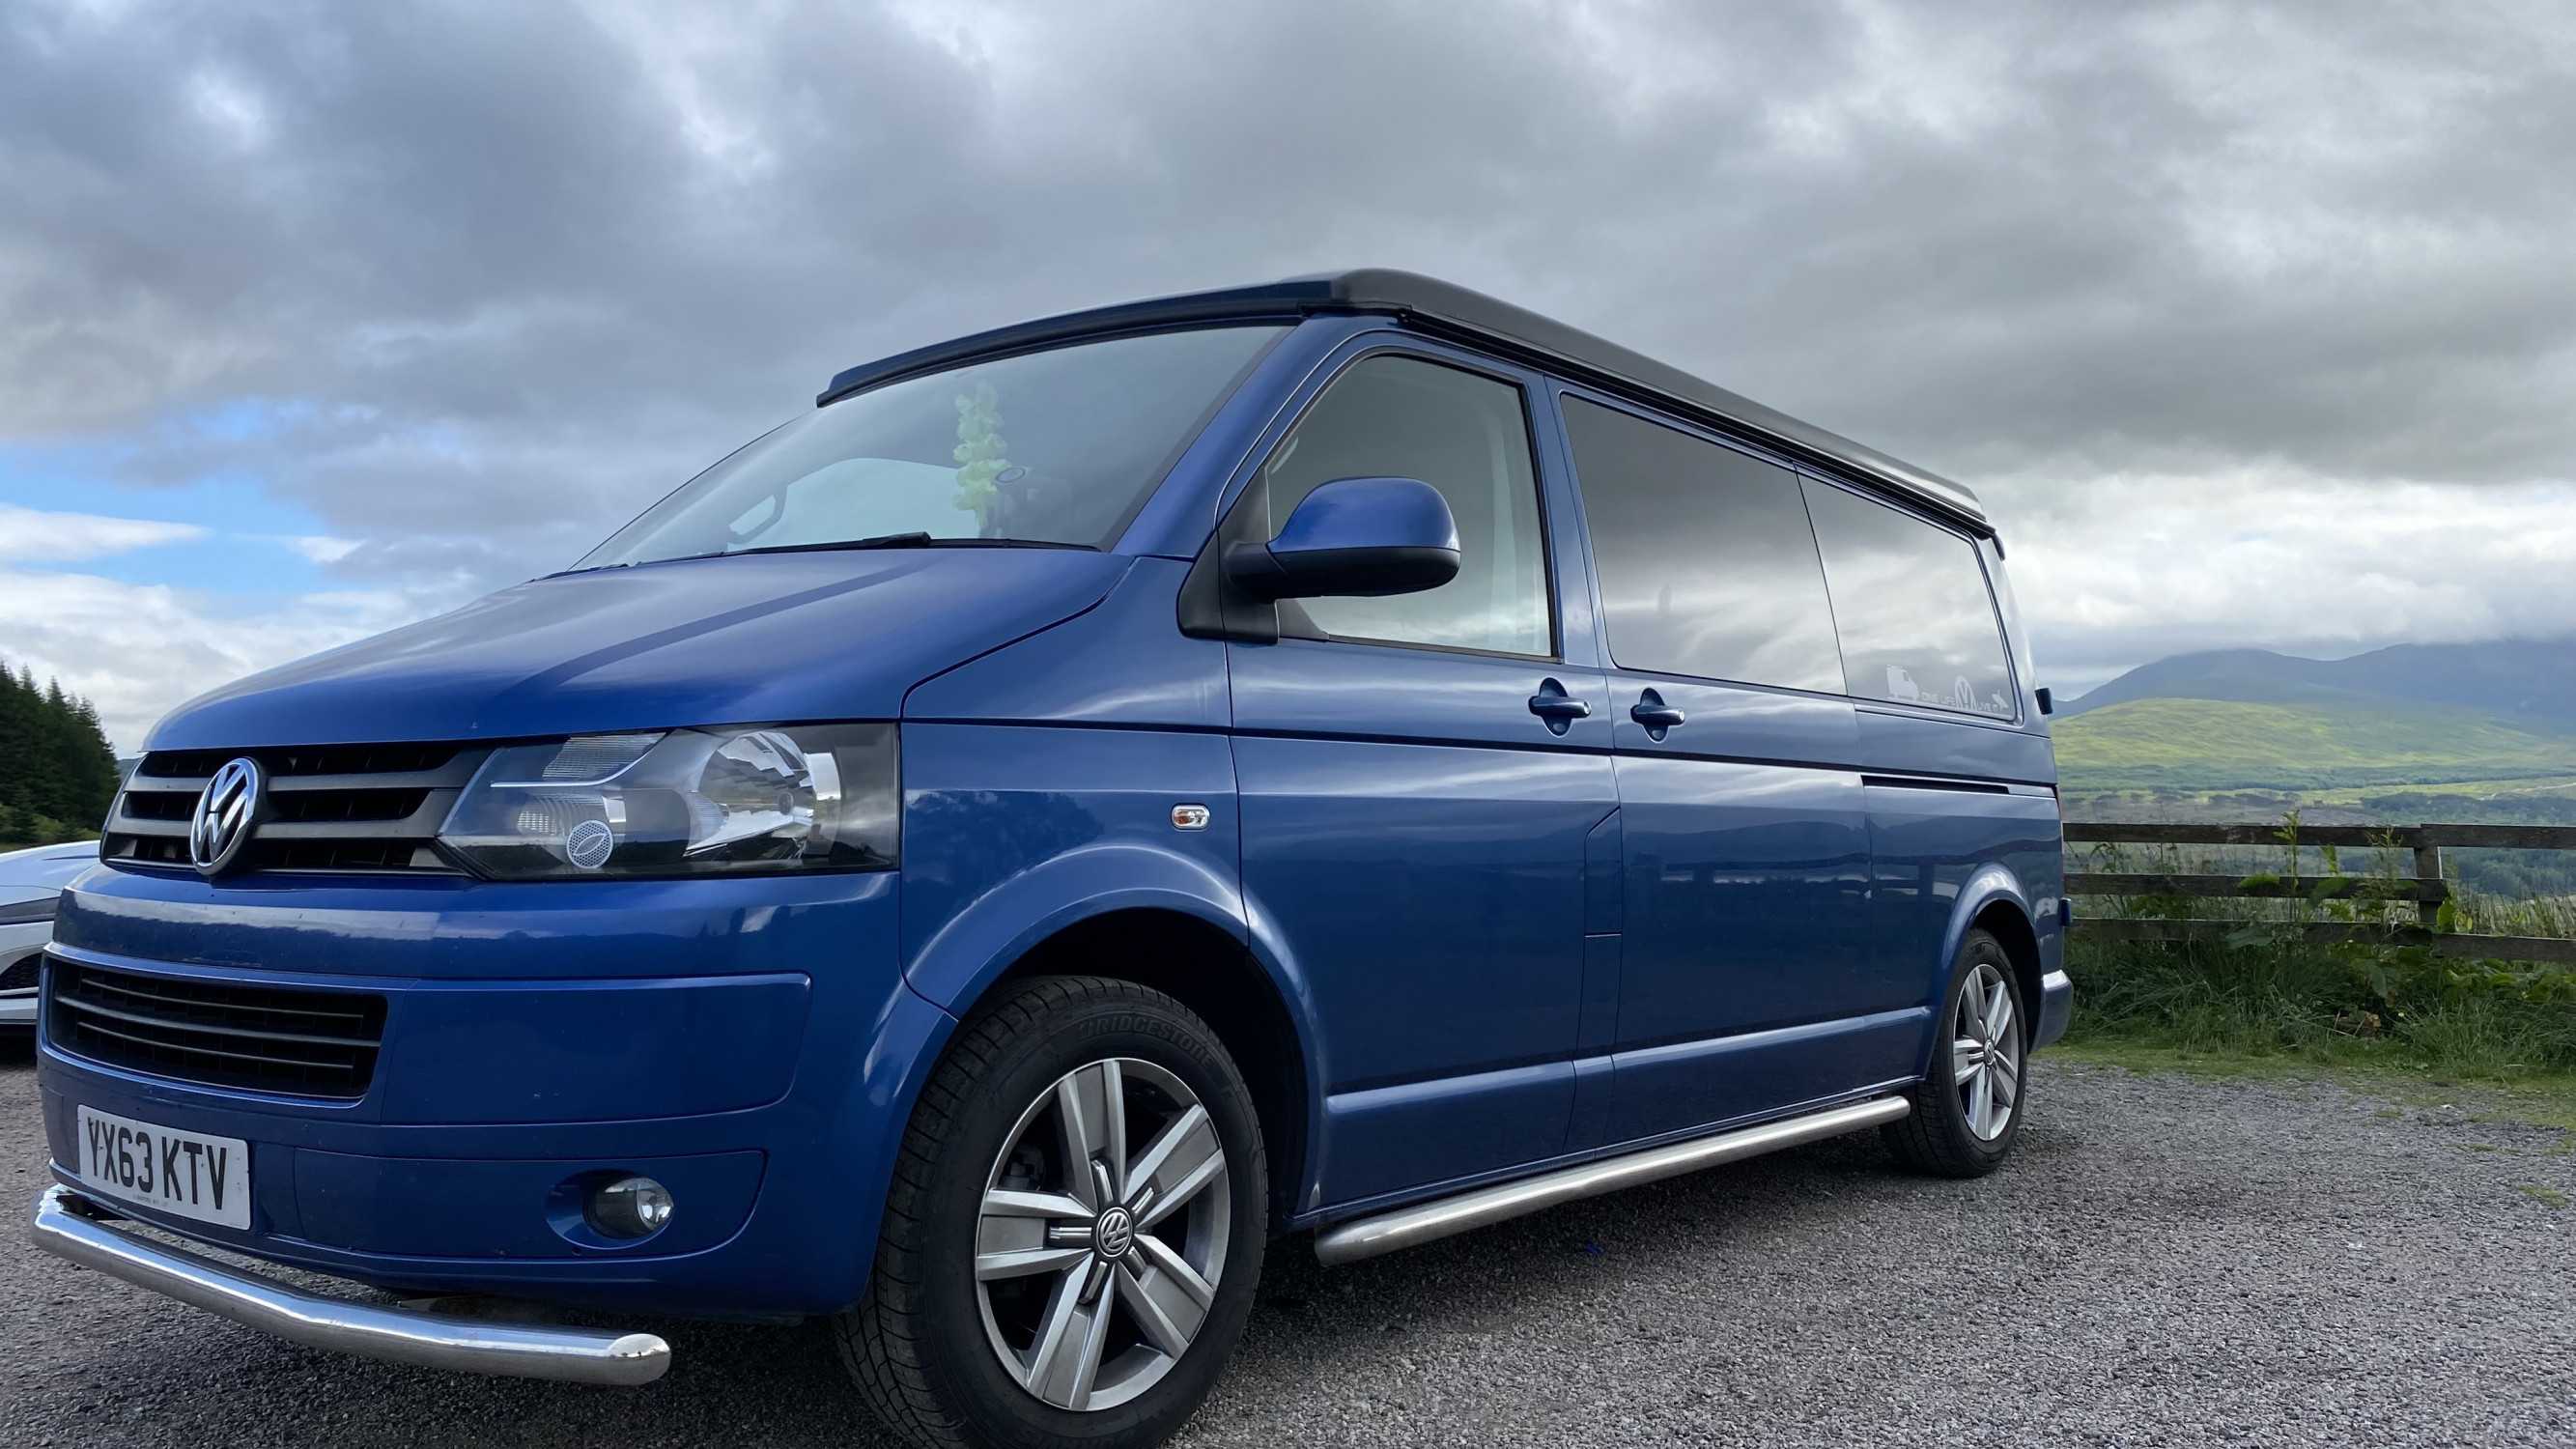 A VW T5 Campervan called Blu-T5 and for hire in Sittingbourn, England